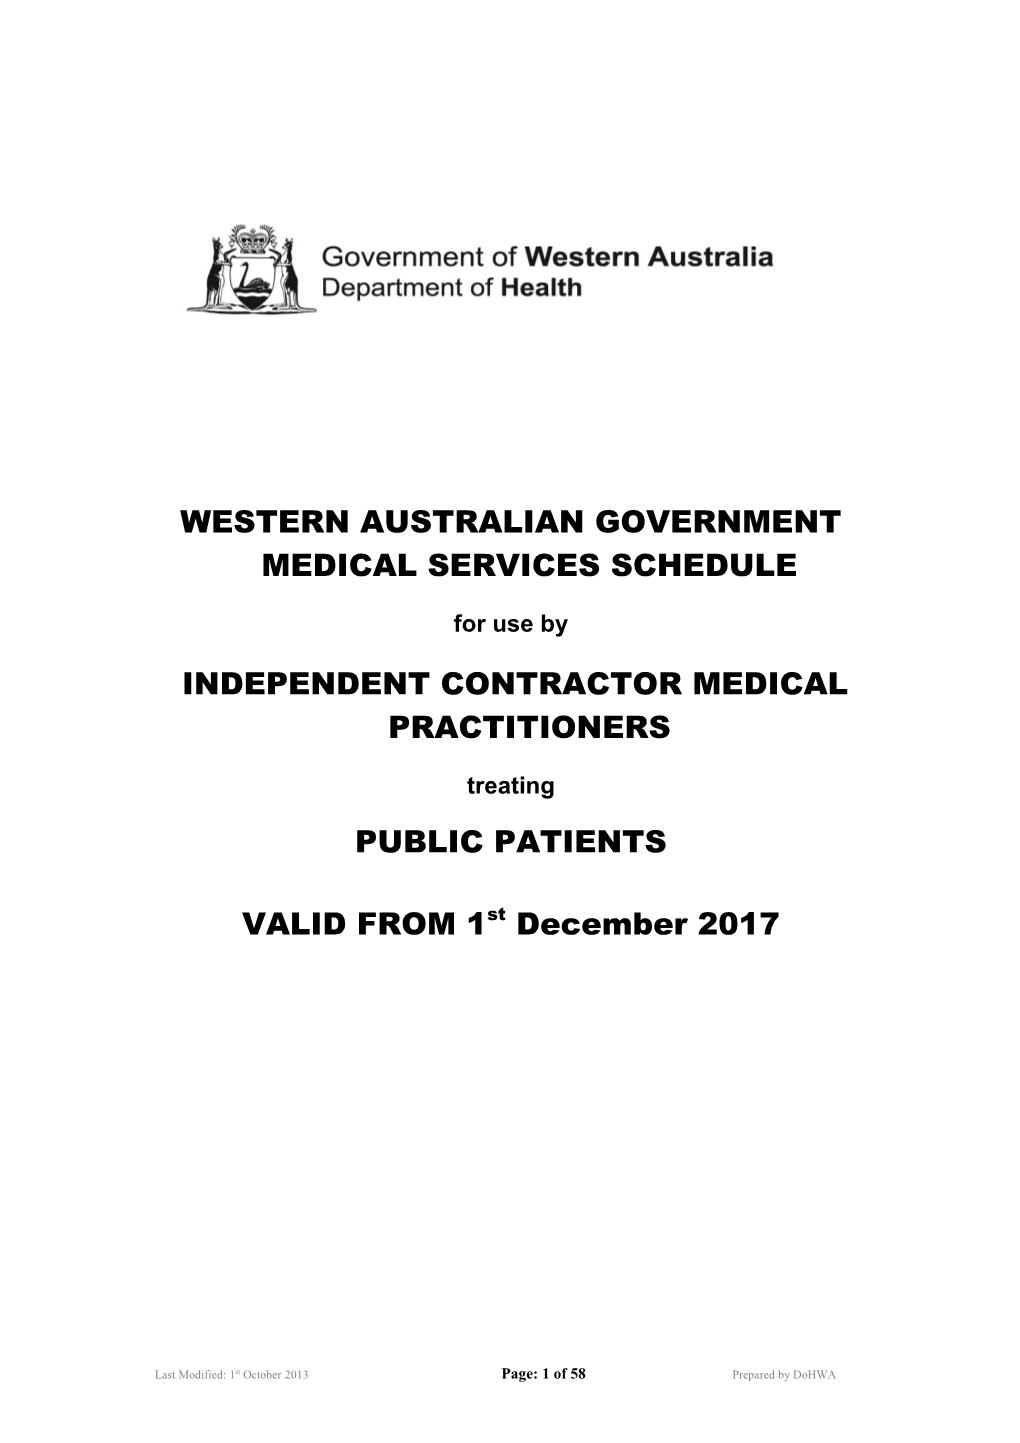 Western Australian Government Medical Services Schedule